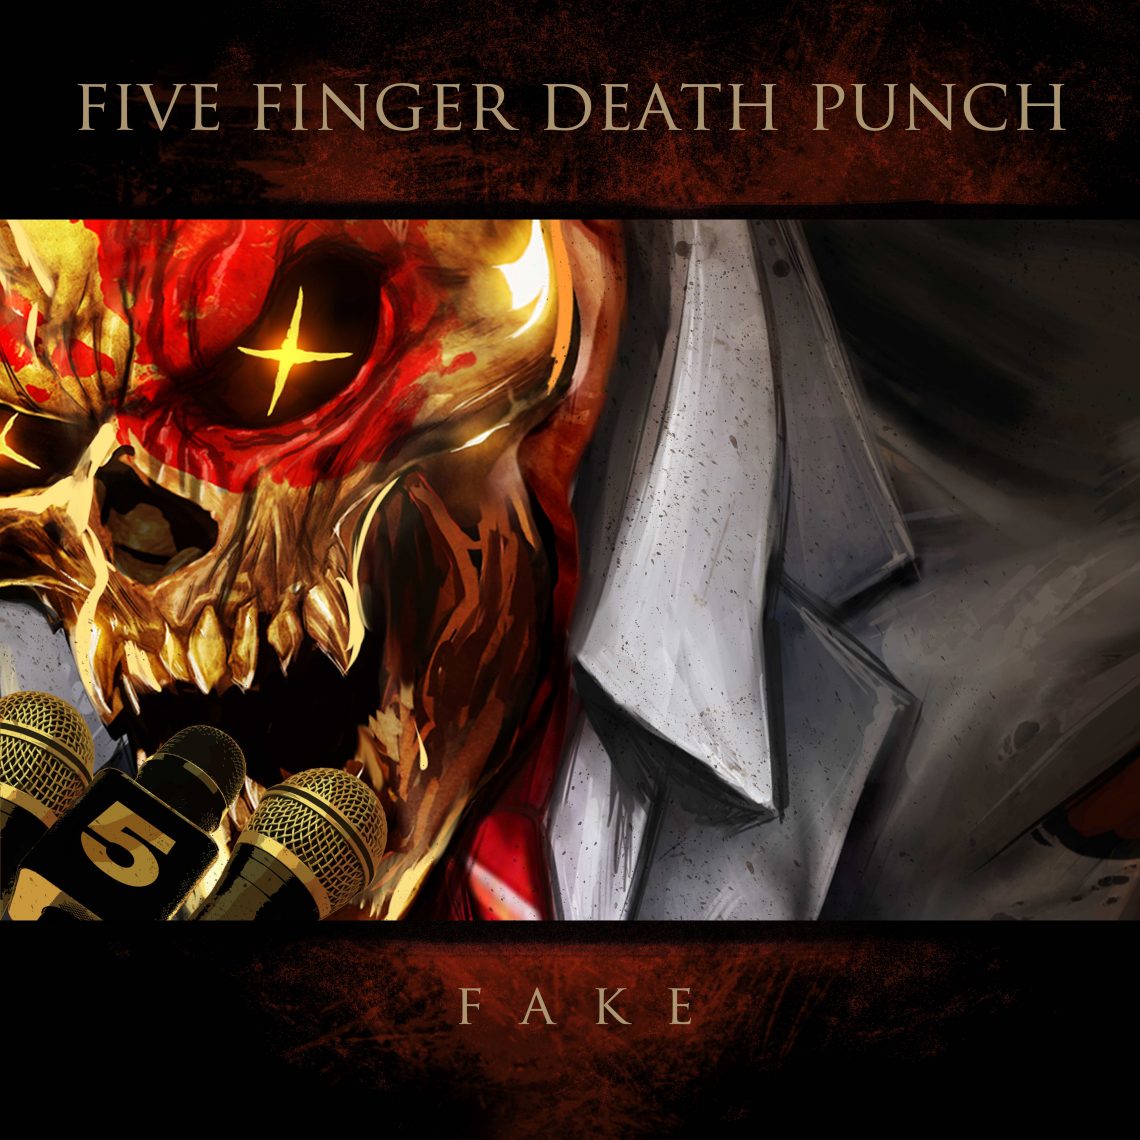 FIVE FINGER DEATH PUNCH reveal brand new song, Fake